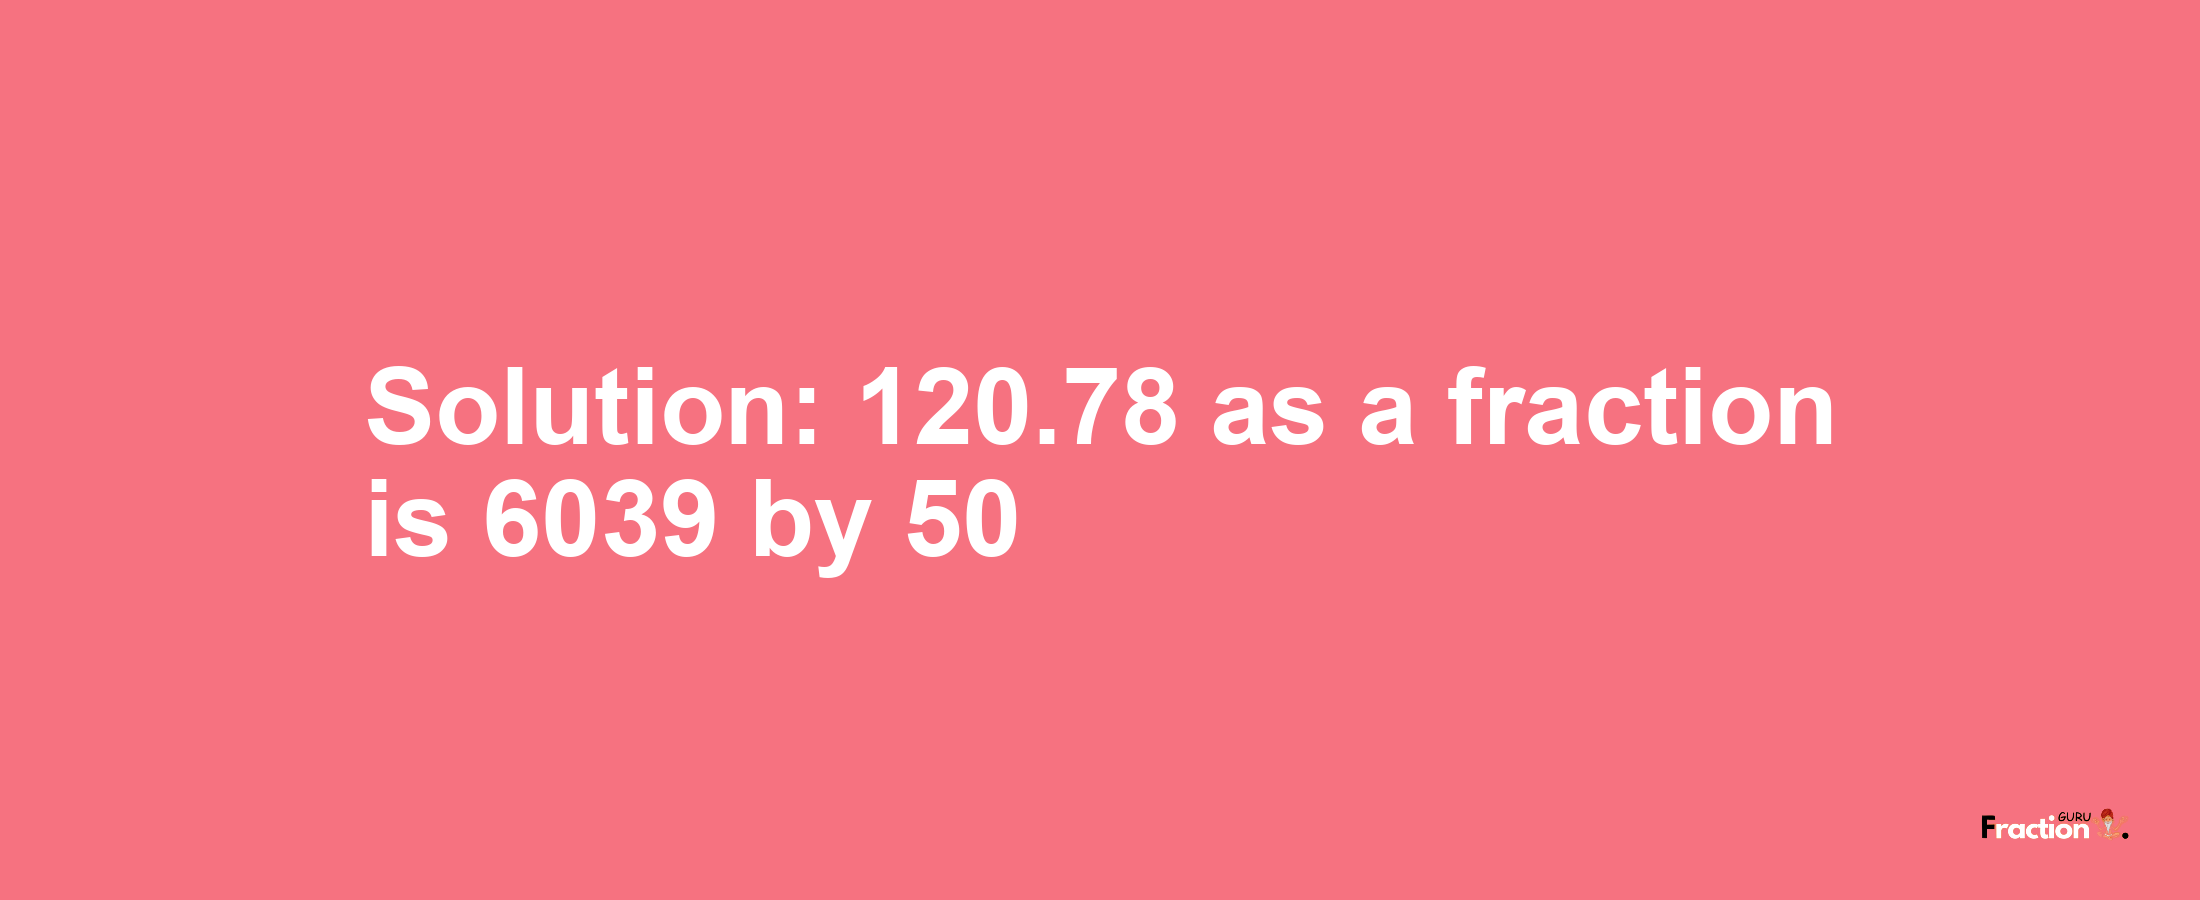 Solution:120.78 as a fraction is 6039/50